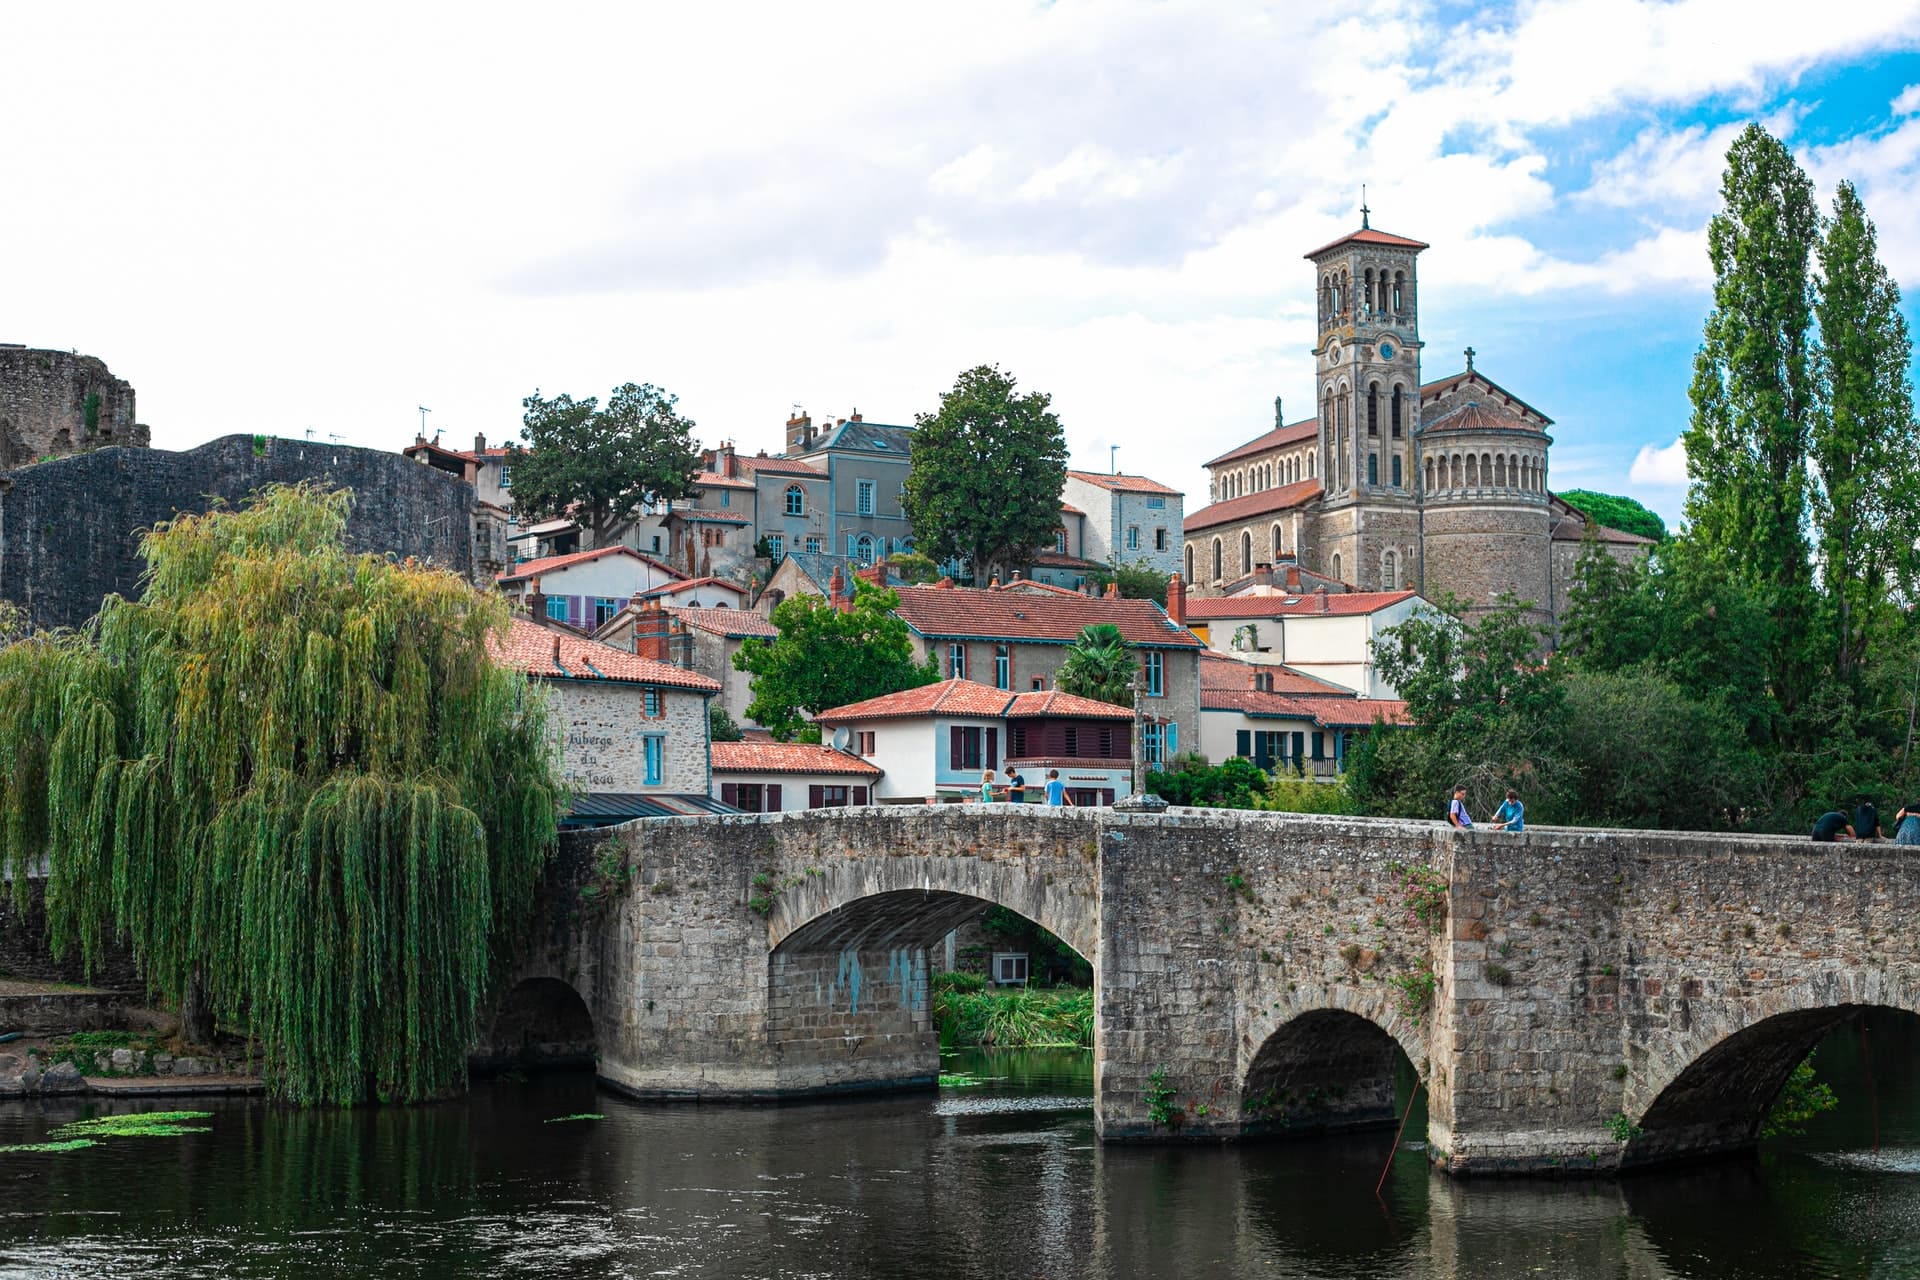 A day out in Clisson